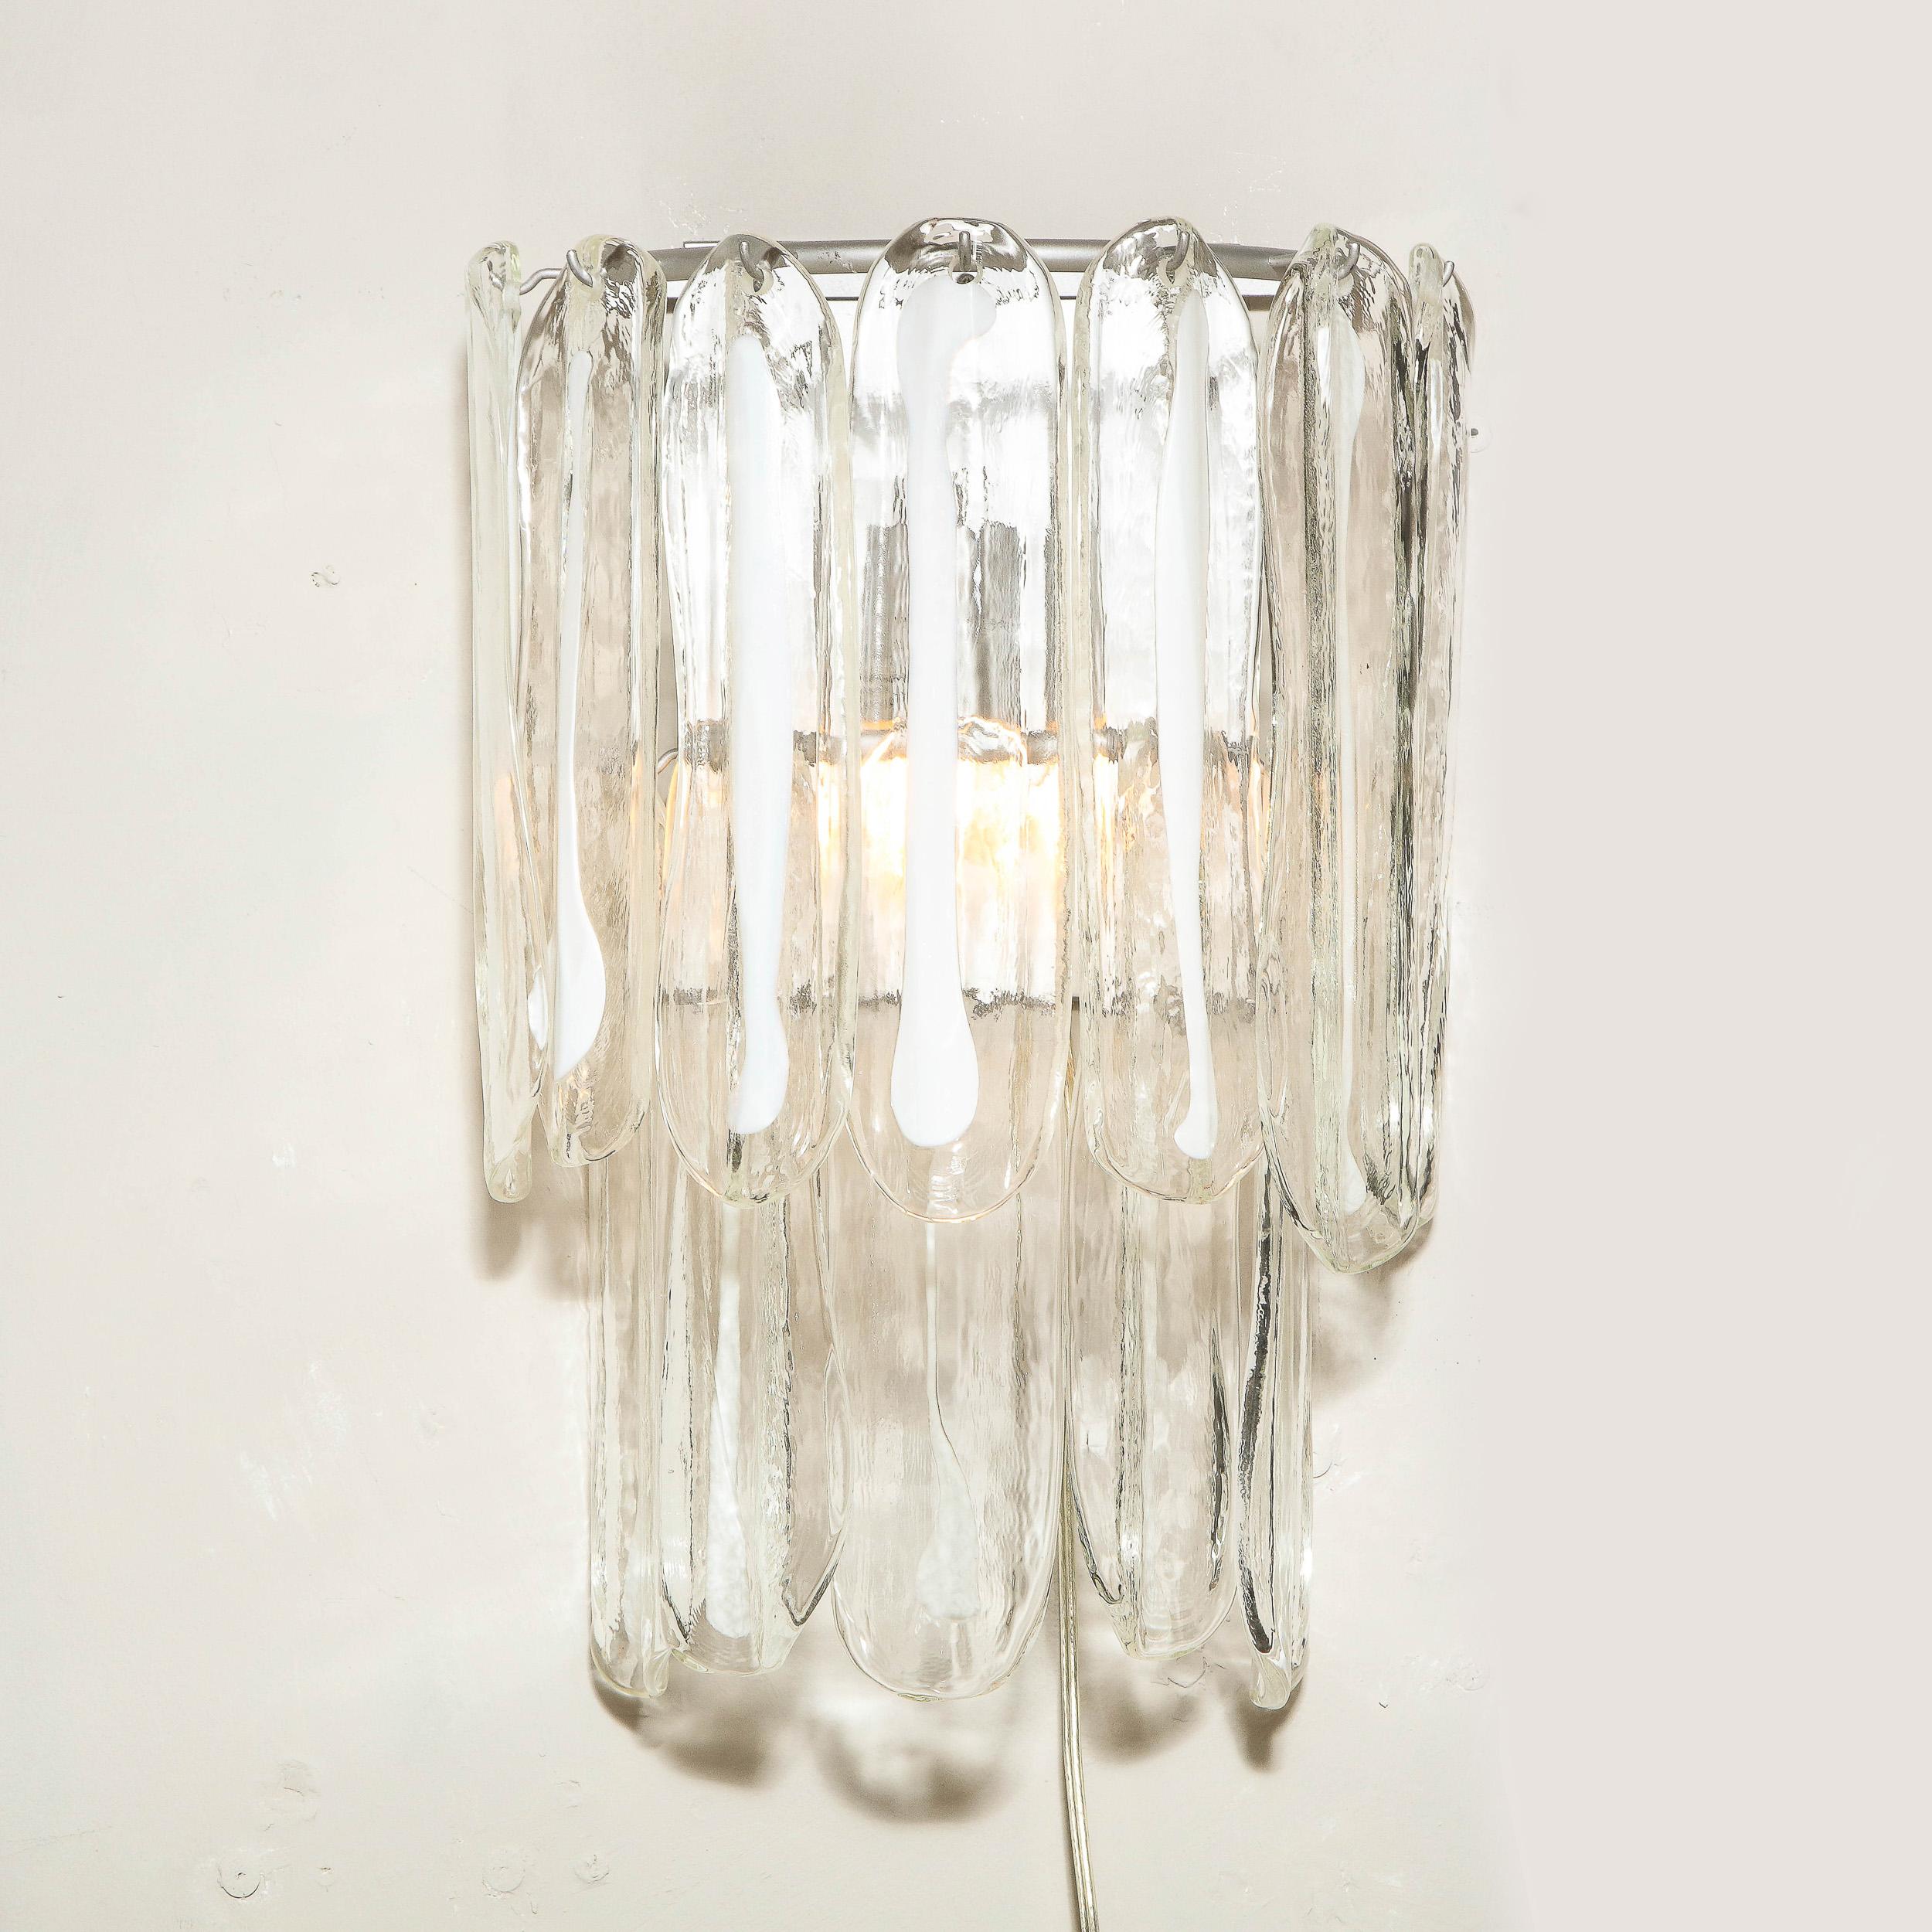 Pair of Mid-Century Modern Translucent & White Murano Glass Sconces by Mazzega In Good Condition For Sale In New York, NY